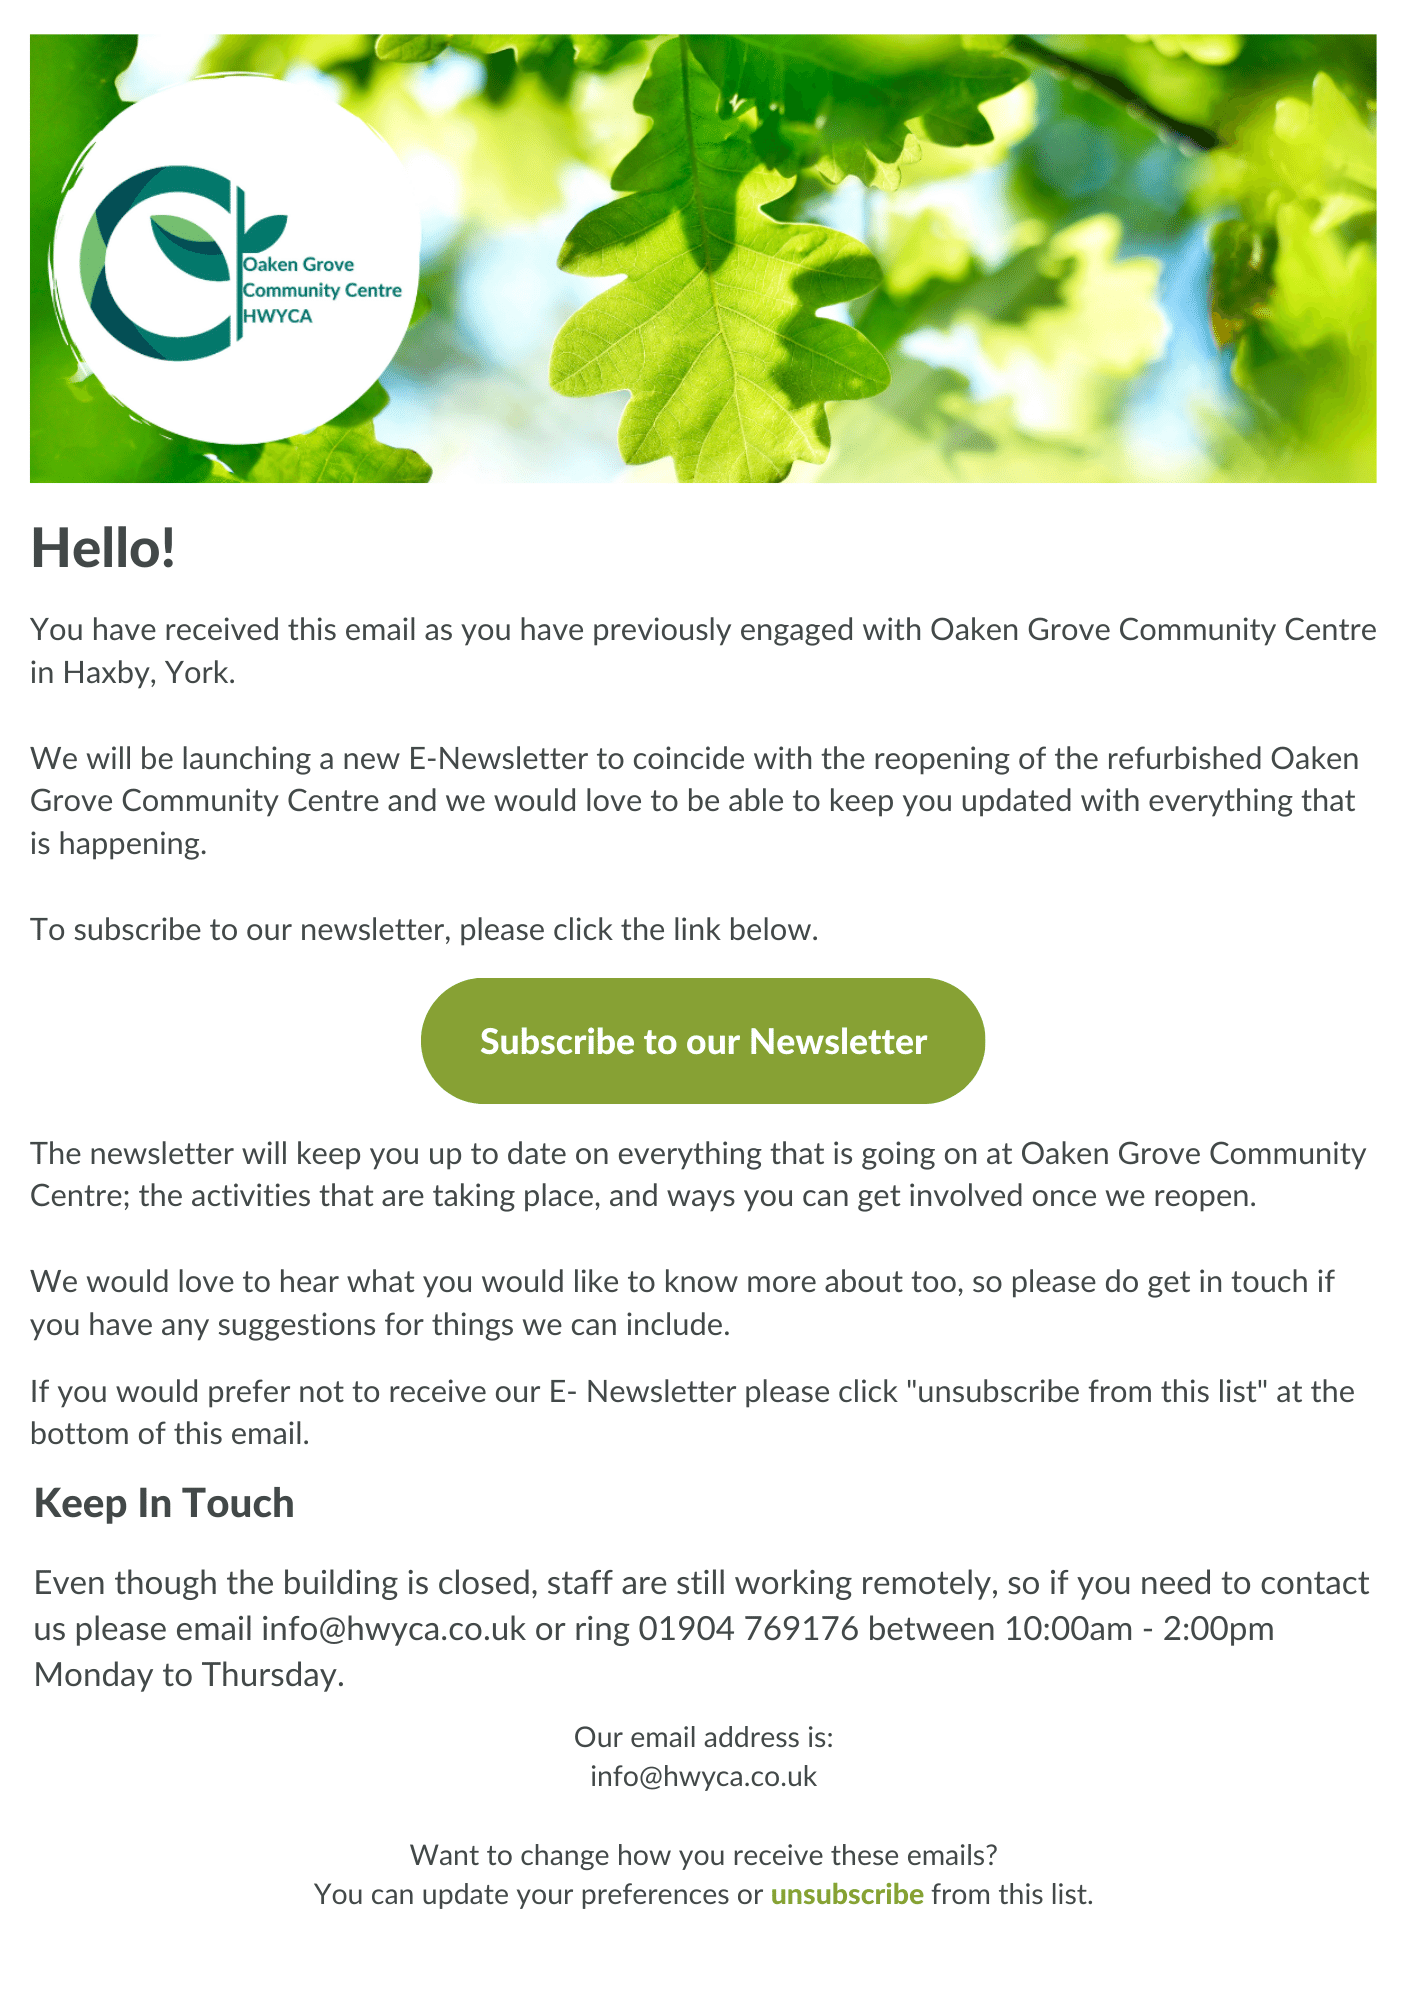 Image shows a small version of a newsletter which is rectangular with a white background. There is a header at the top of the page with green oak leaves and the Oaken Grove Community Centre logo on a white background on top of this header. Below this is the word "Hello" written in black. Below this is lines of indistinguishable text to give the idea of a newsletter. There is also a green oval button with the words "Subscribe to our newsletter" written in white.